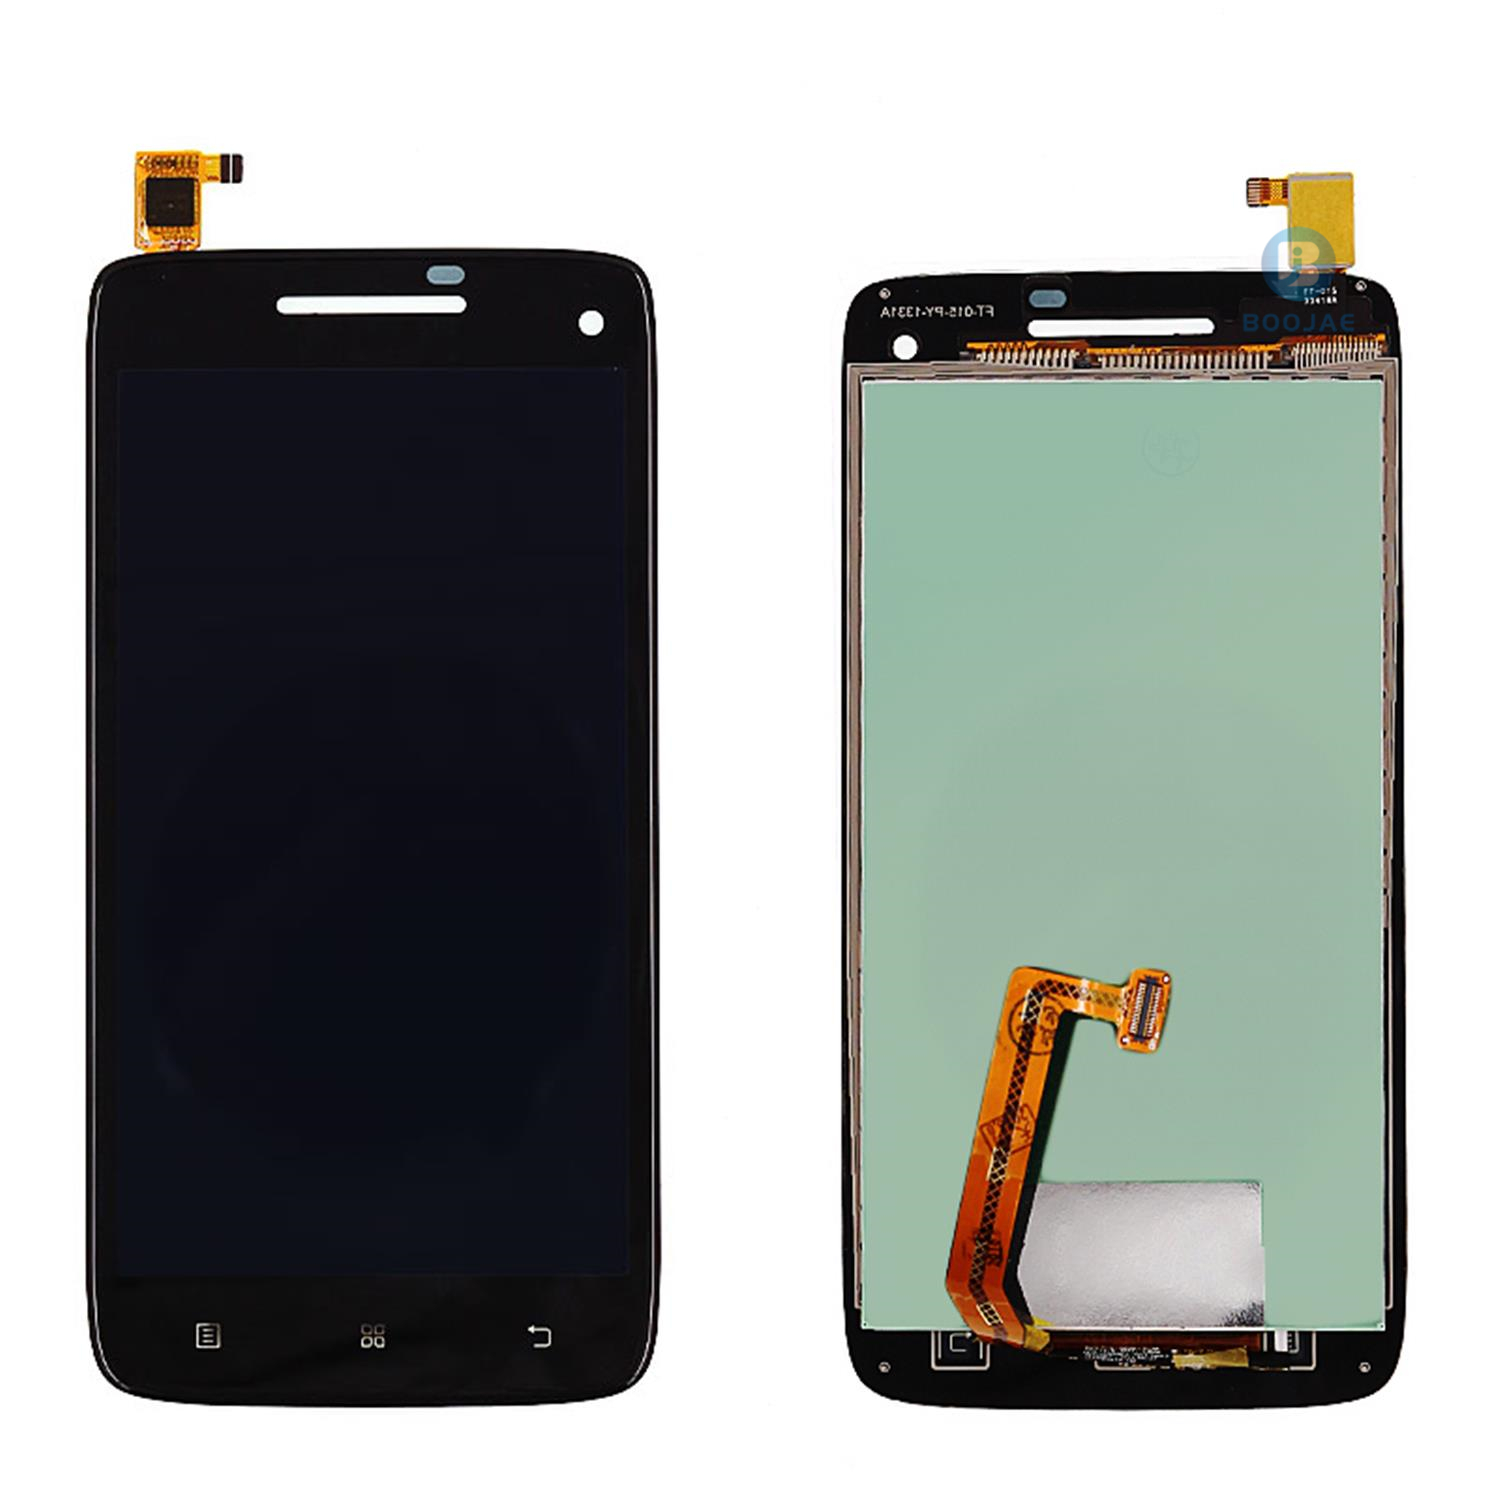 Lenovo S960 LCD Screen Display, Lcd Assembly Replacement